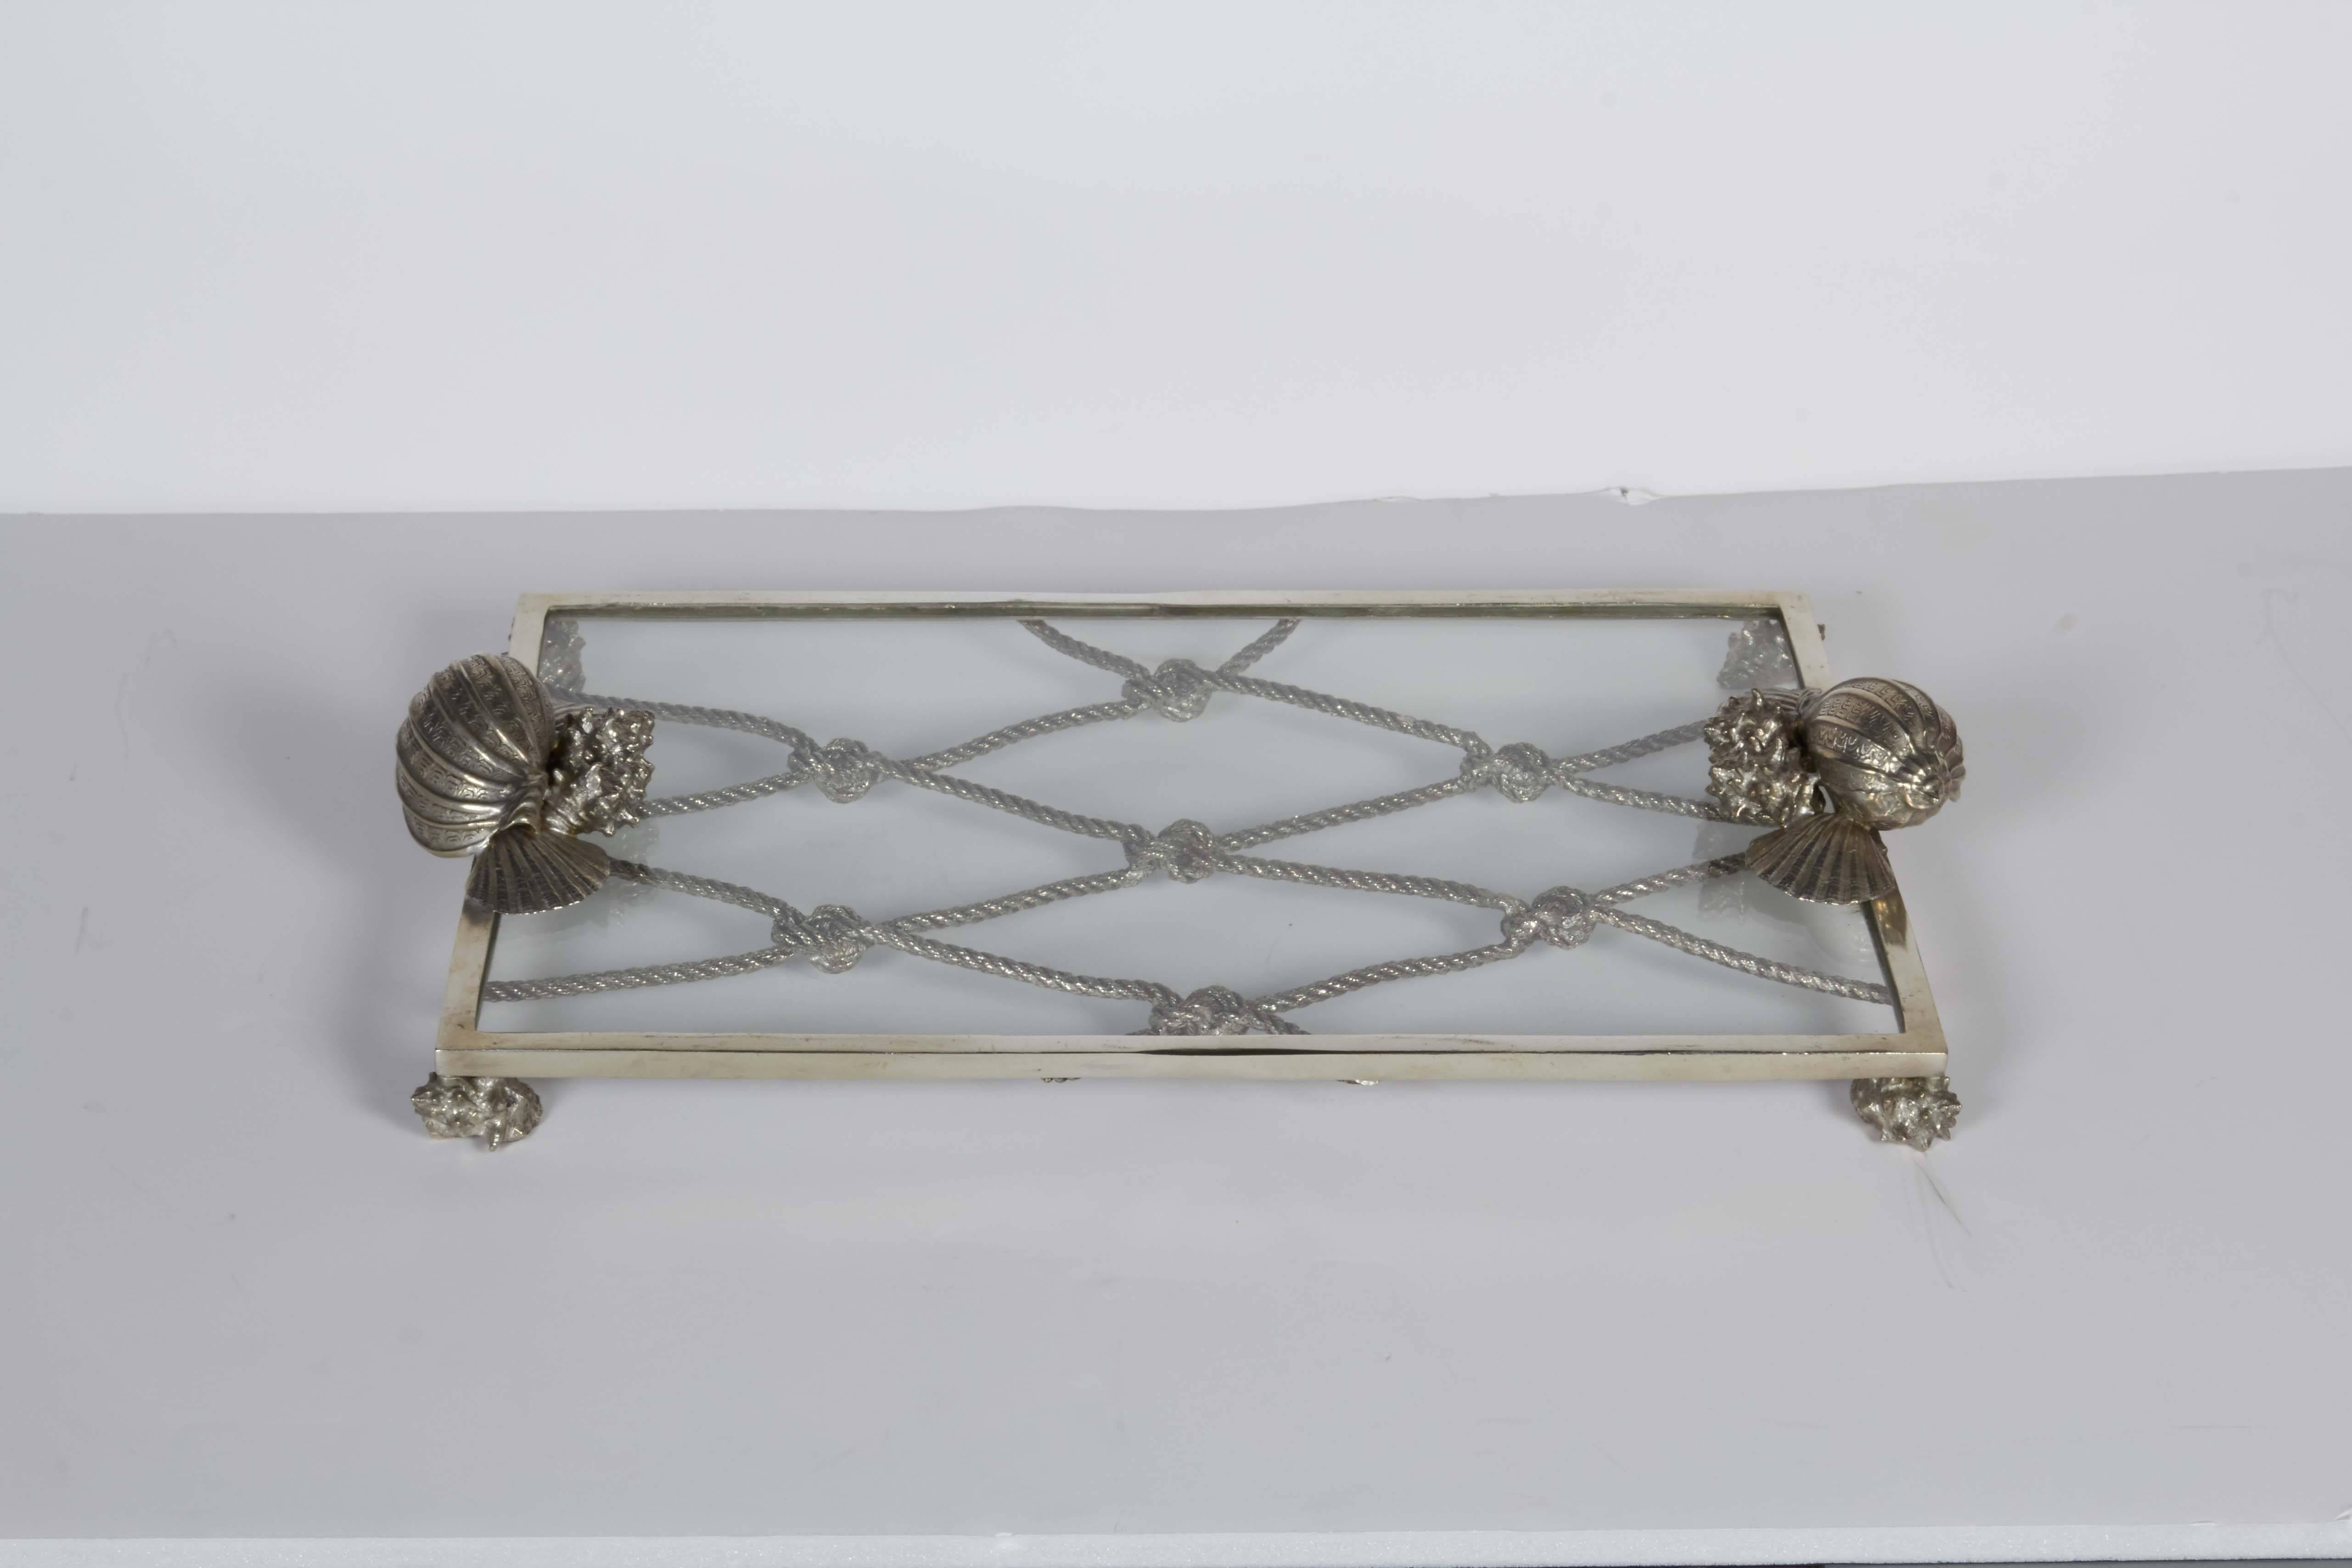 American Elegant Renaissance Revival Serving Tray with Nautical Theme